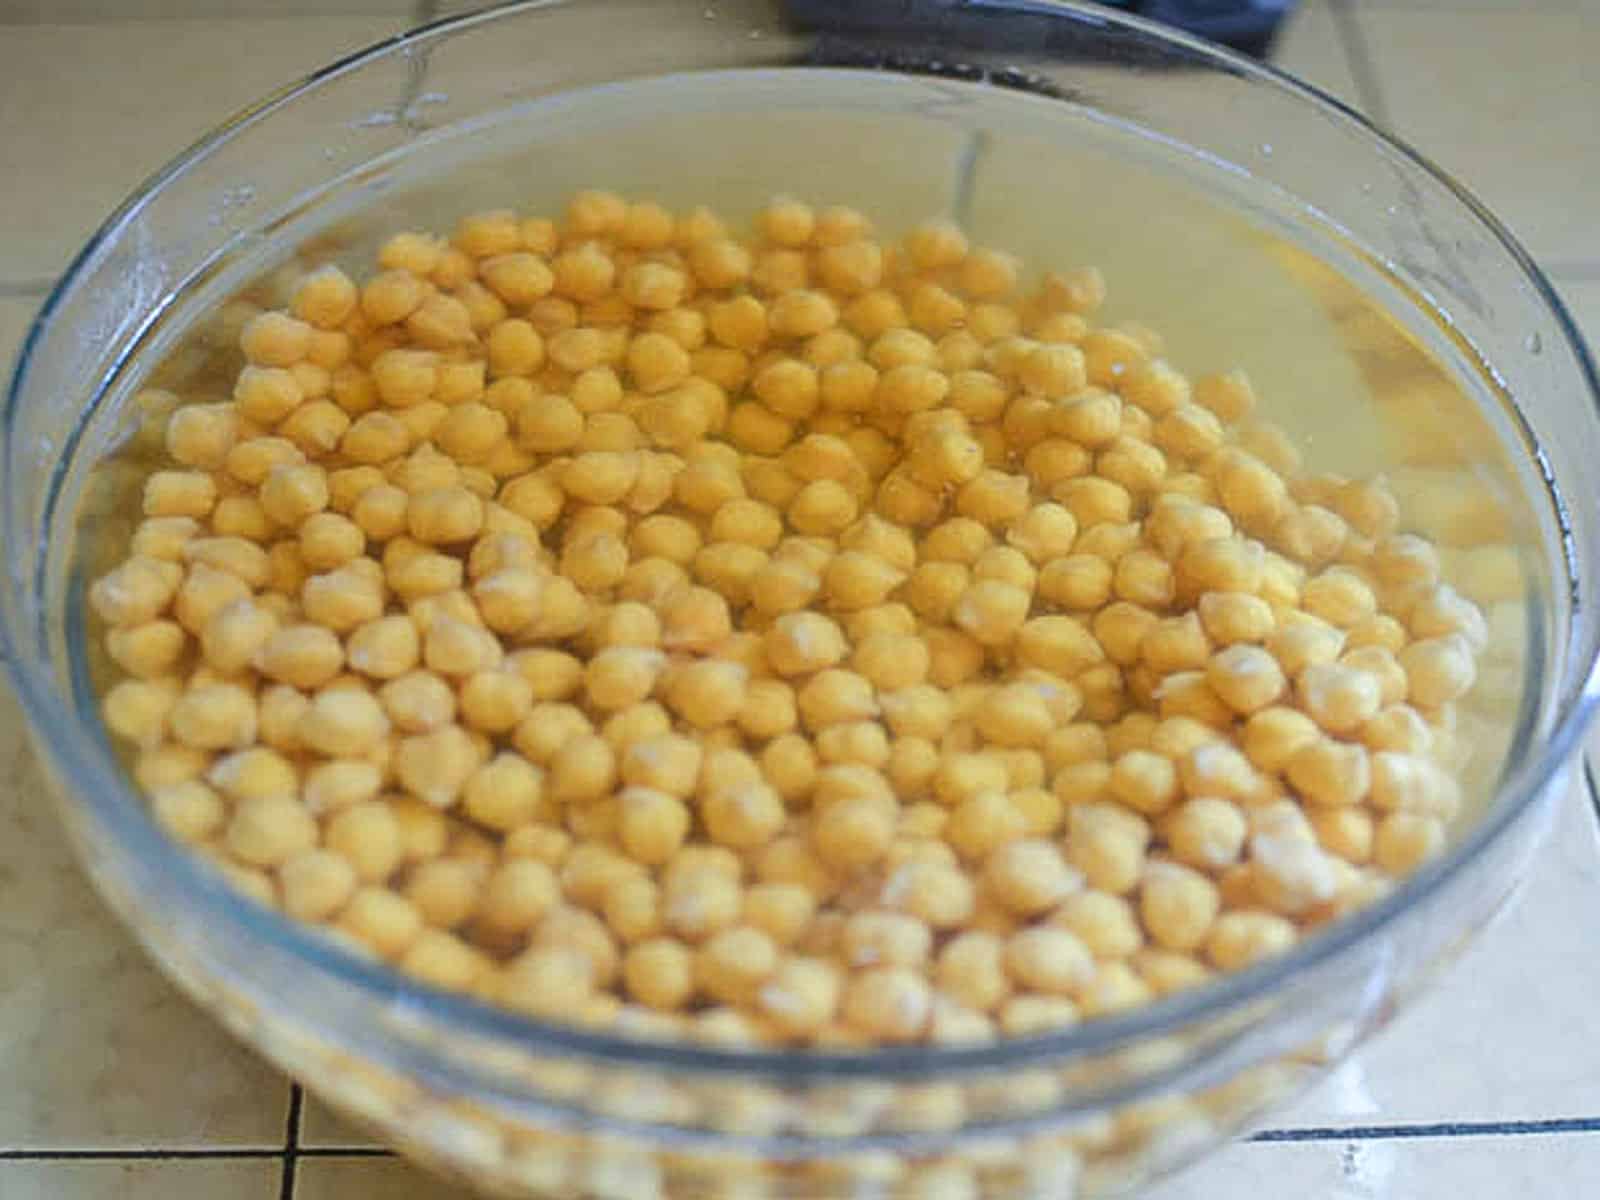 Soak the dried chickpeas in water for at least 8 hours or overnight, until they double in size. 